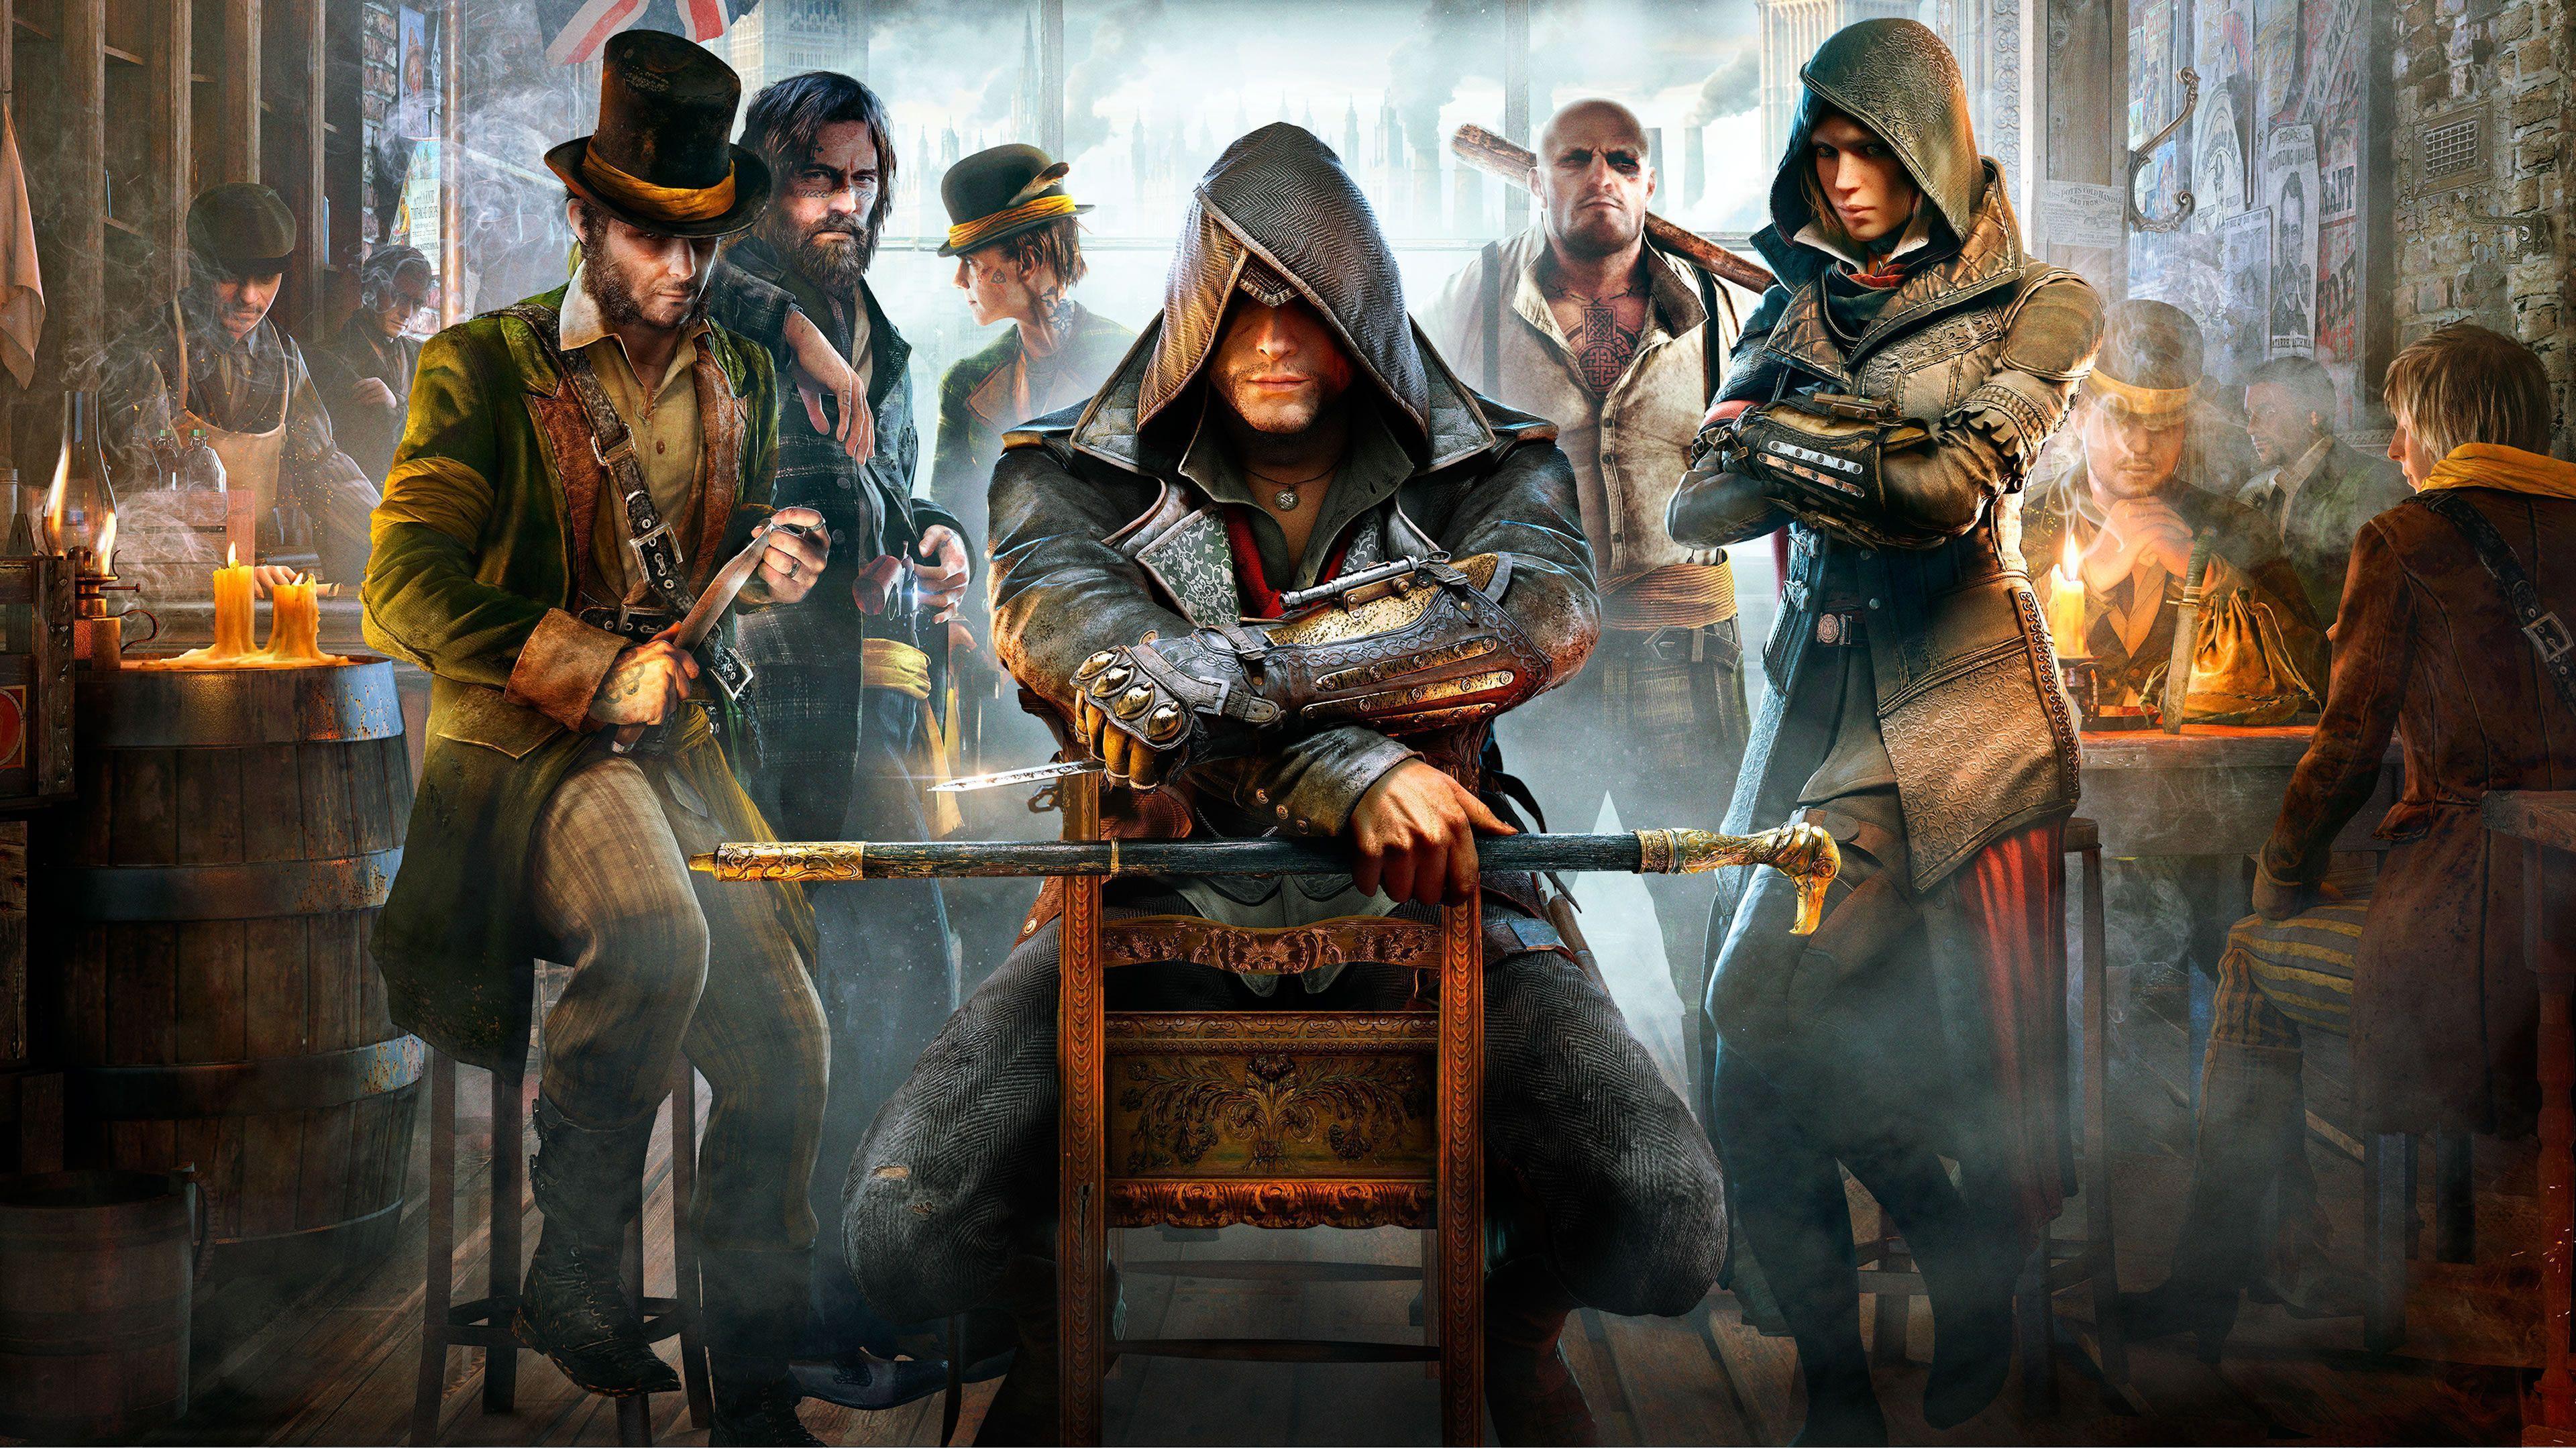 Assassin&Creed: Syndicate HD wallpapers free download